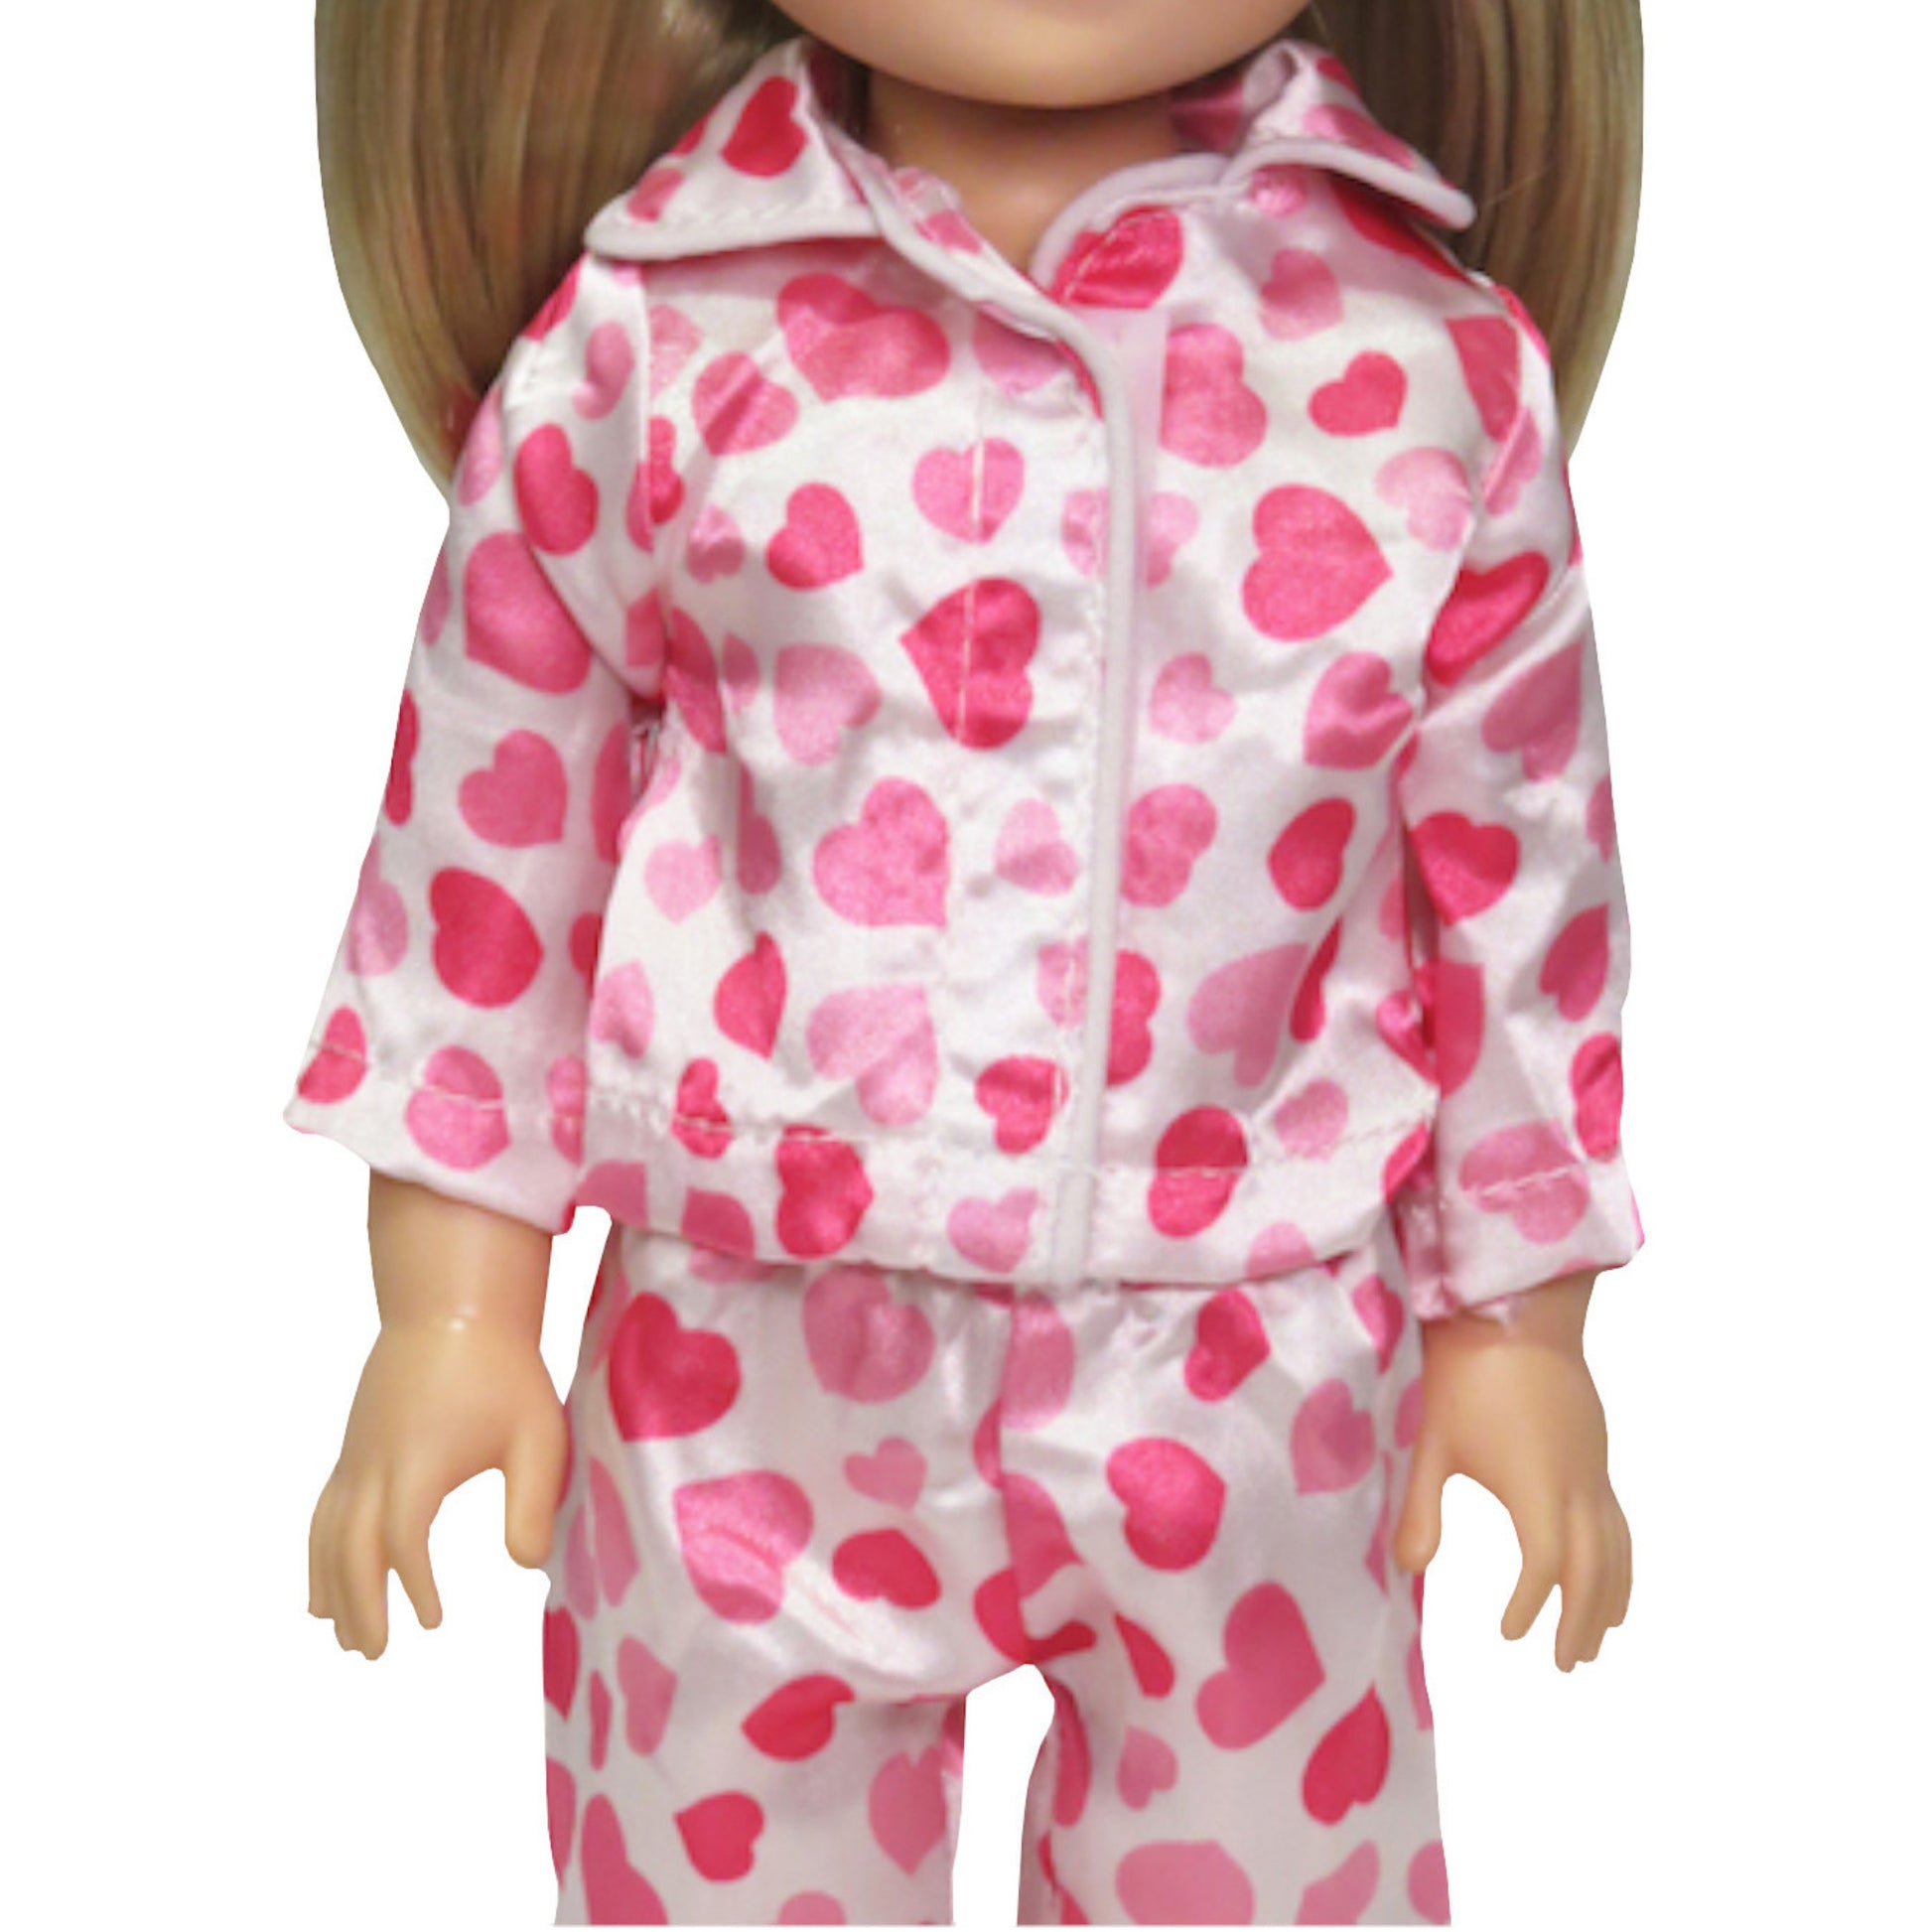 Pink Heart Pajamas for 14 1/2-inch dolls with doll Up Close